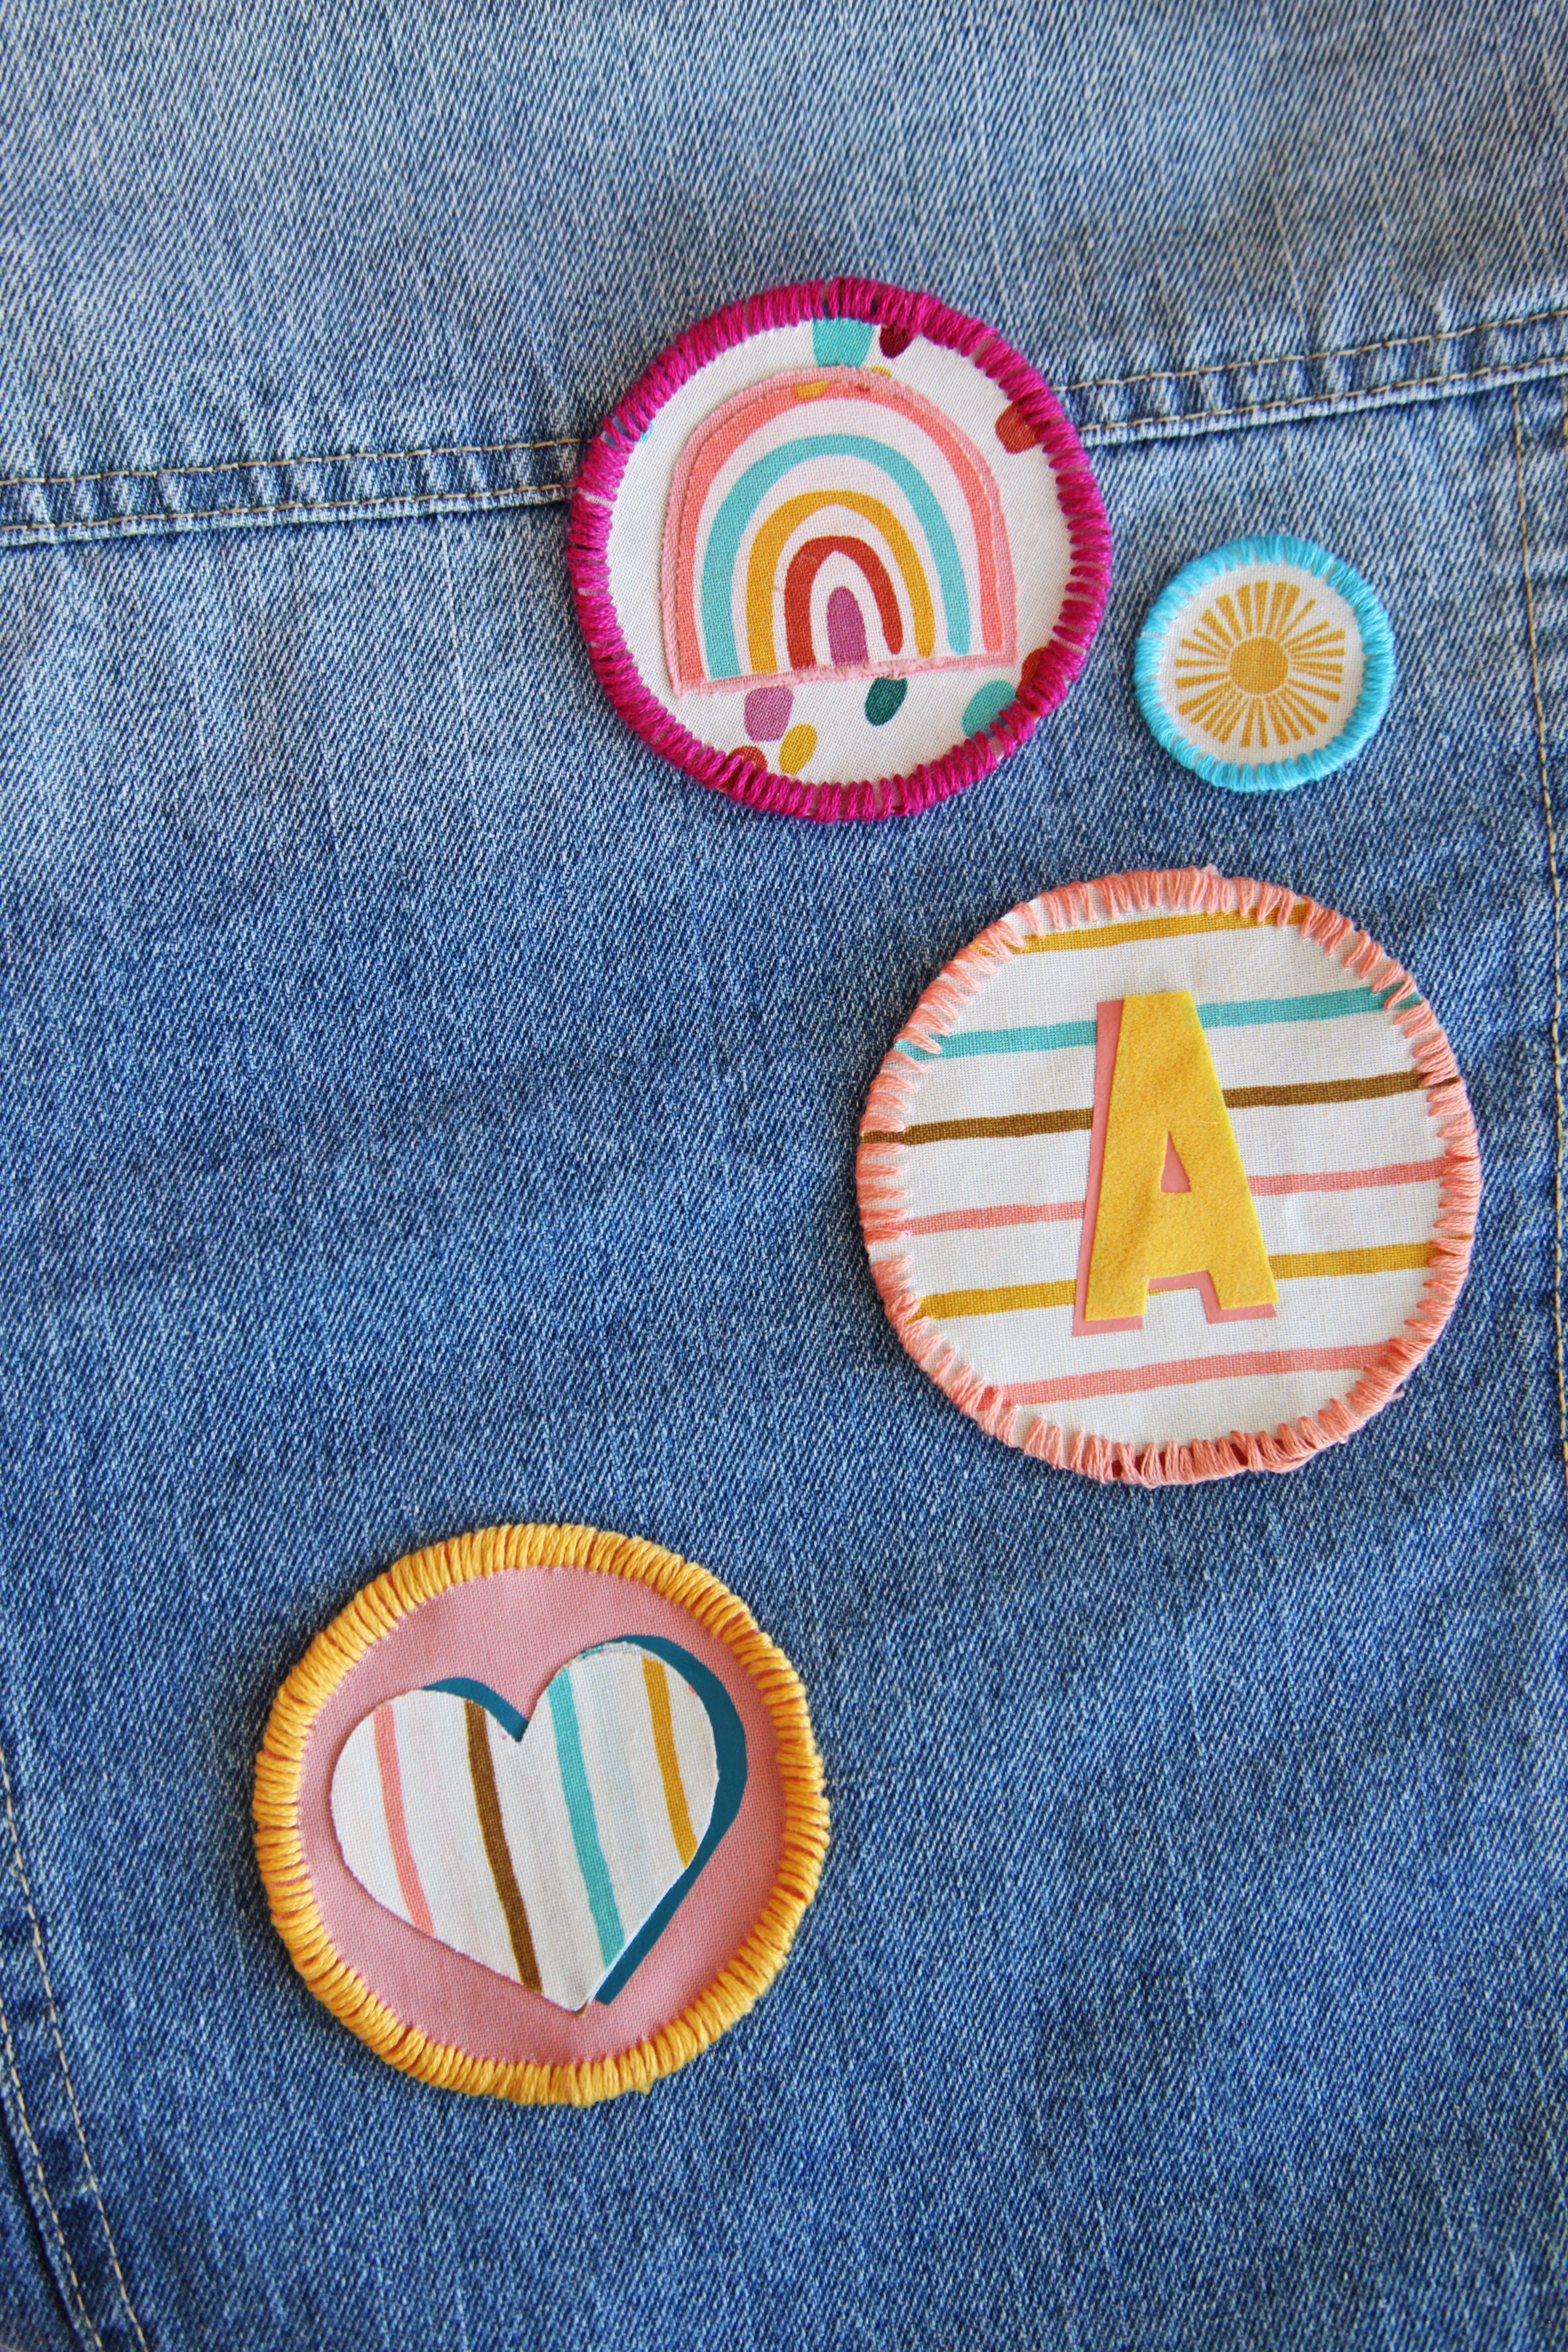 Eight Easy Ways to Make Your Own Patches – The Daily Sew